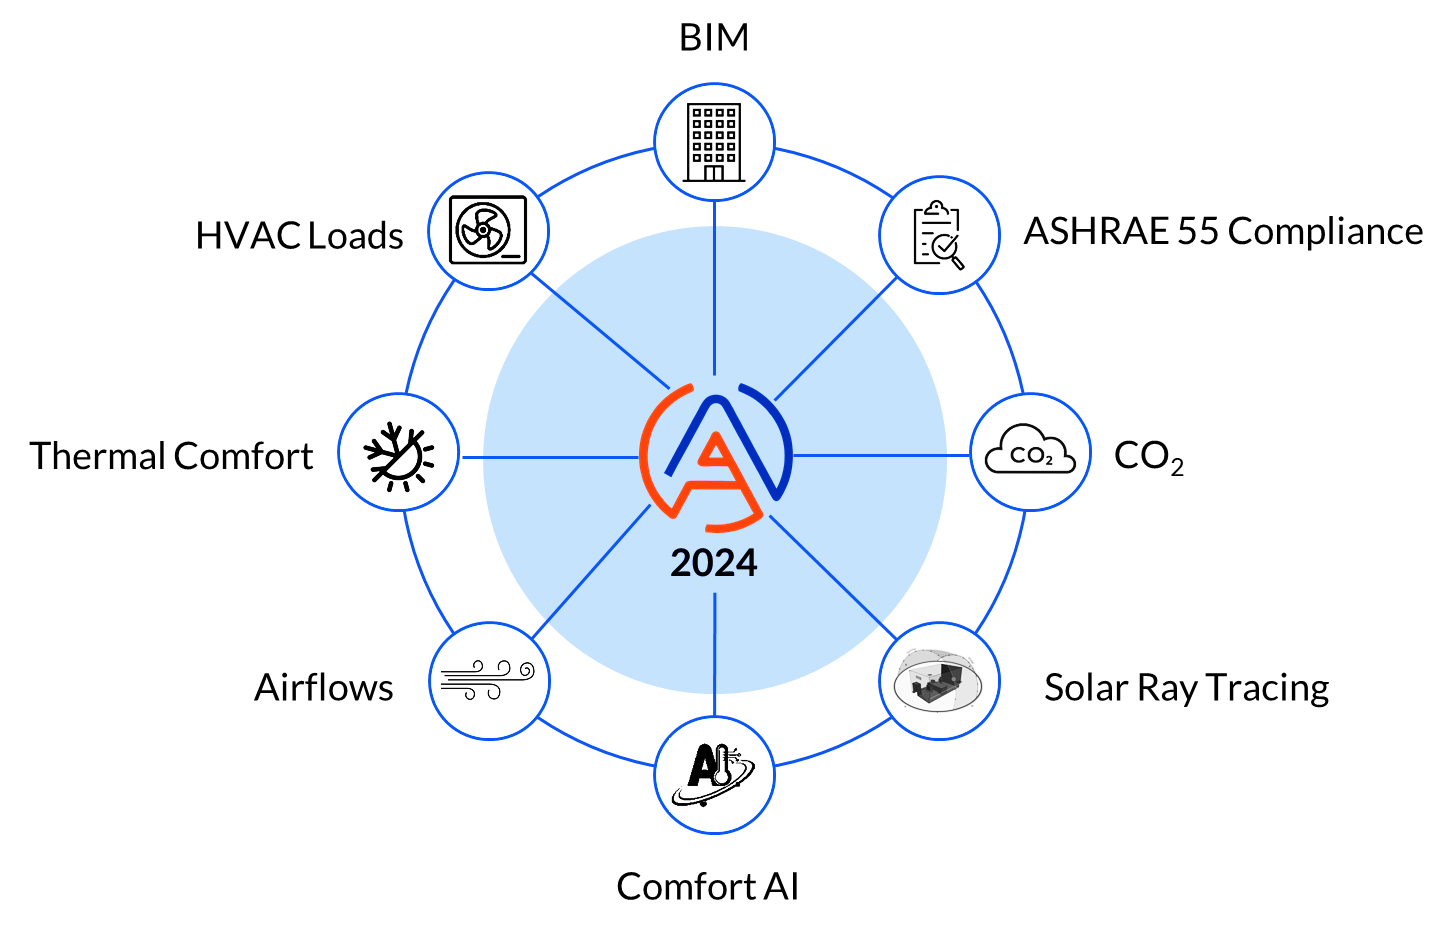 Key Features of AHC 2024